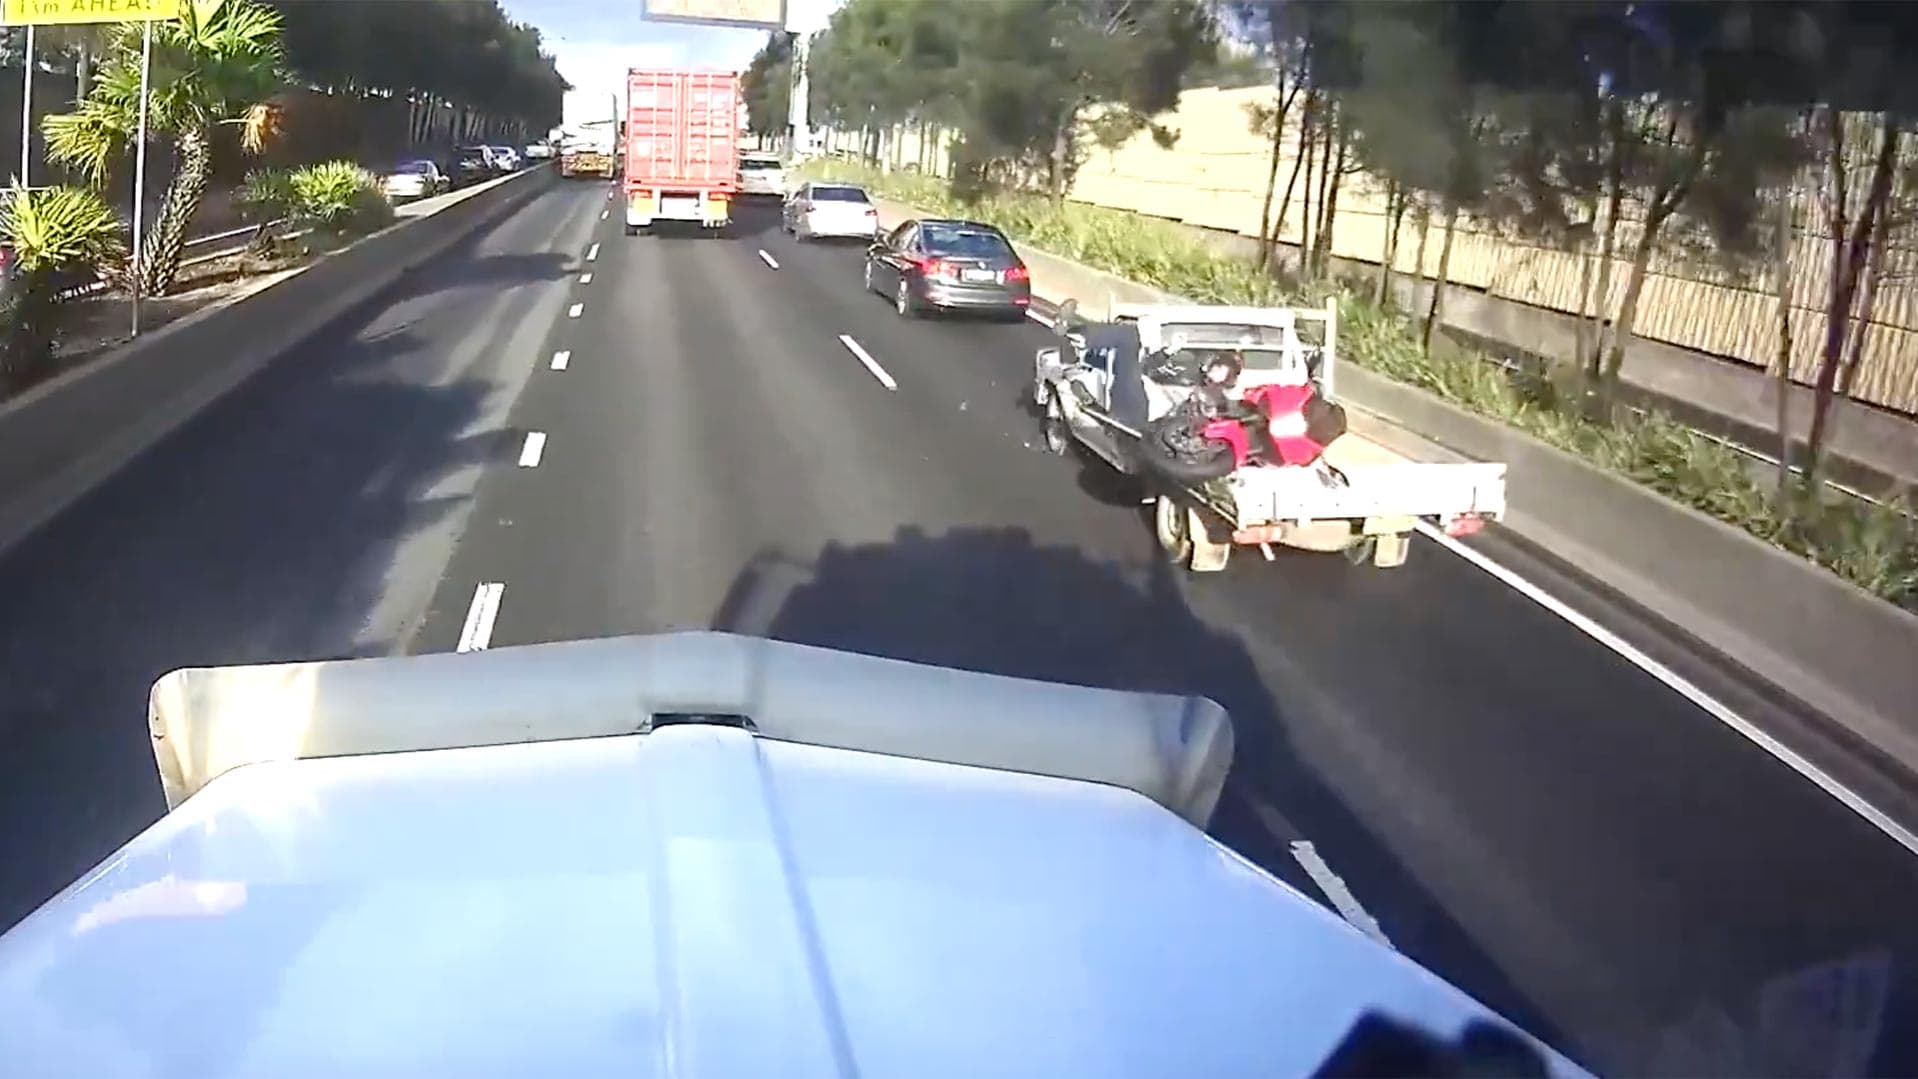 Watch This Motorcycle Rider Flip Into a Truck’s Bed—Along With His Bike